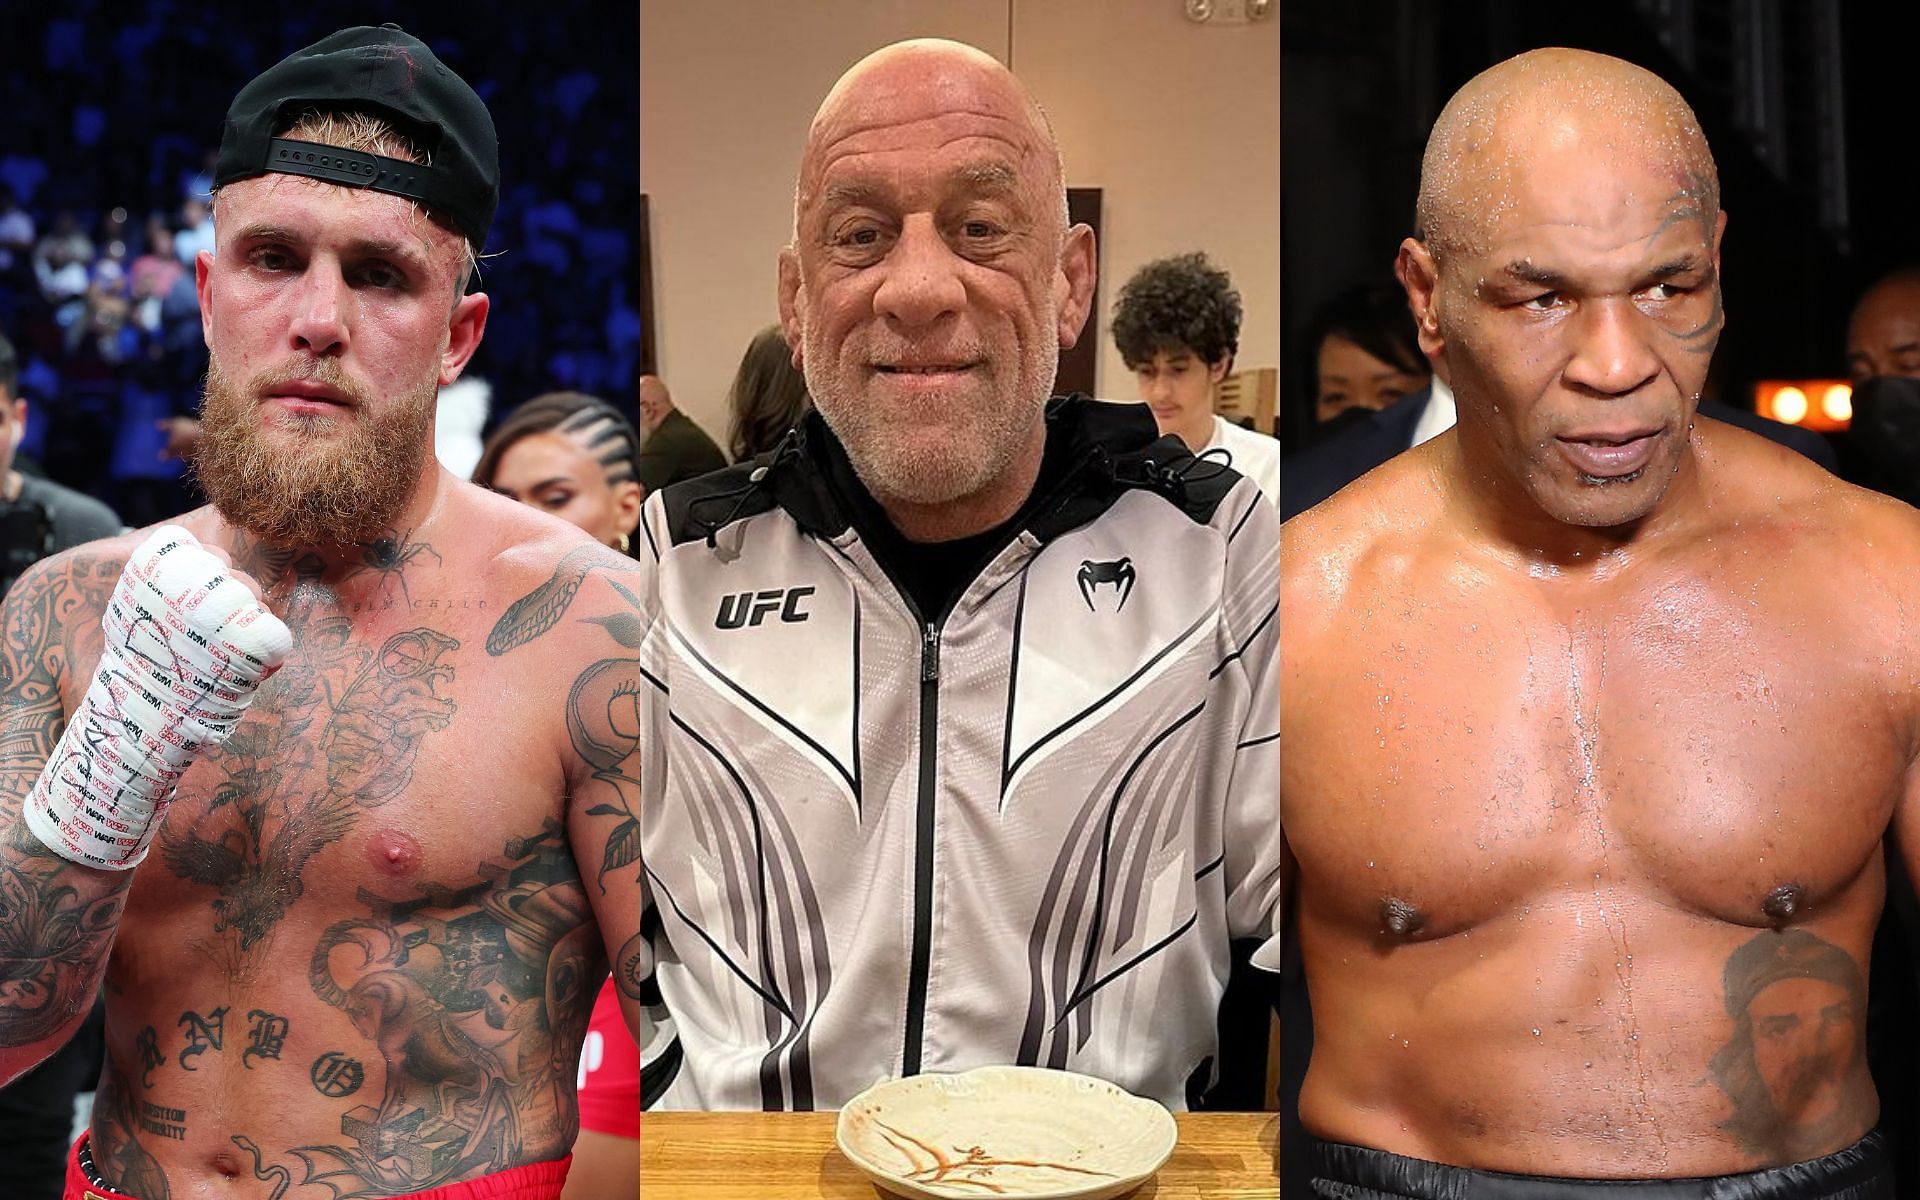 Mark Coleman (middle) has given his take on the boxing match between Jake Paul (left) and Mike Tyson (right) [Images courtesy: @markcolemanufc on Instagram and Getty Images]